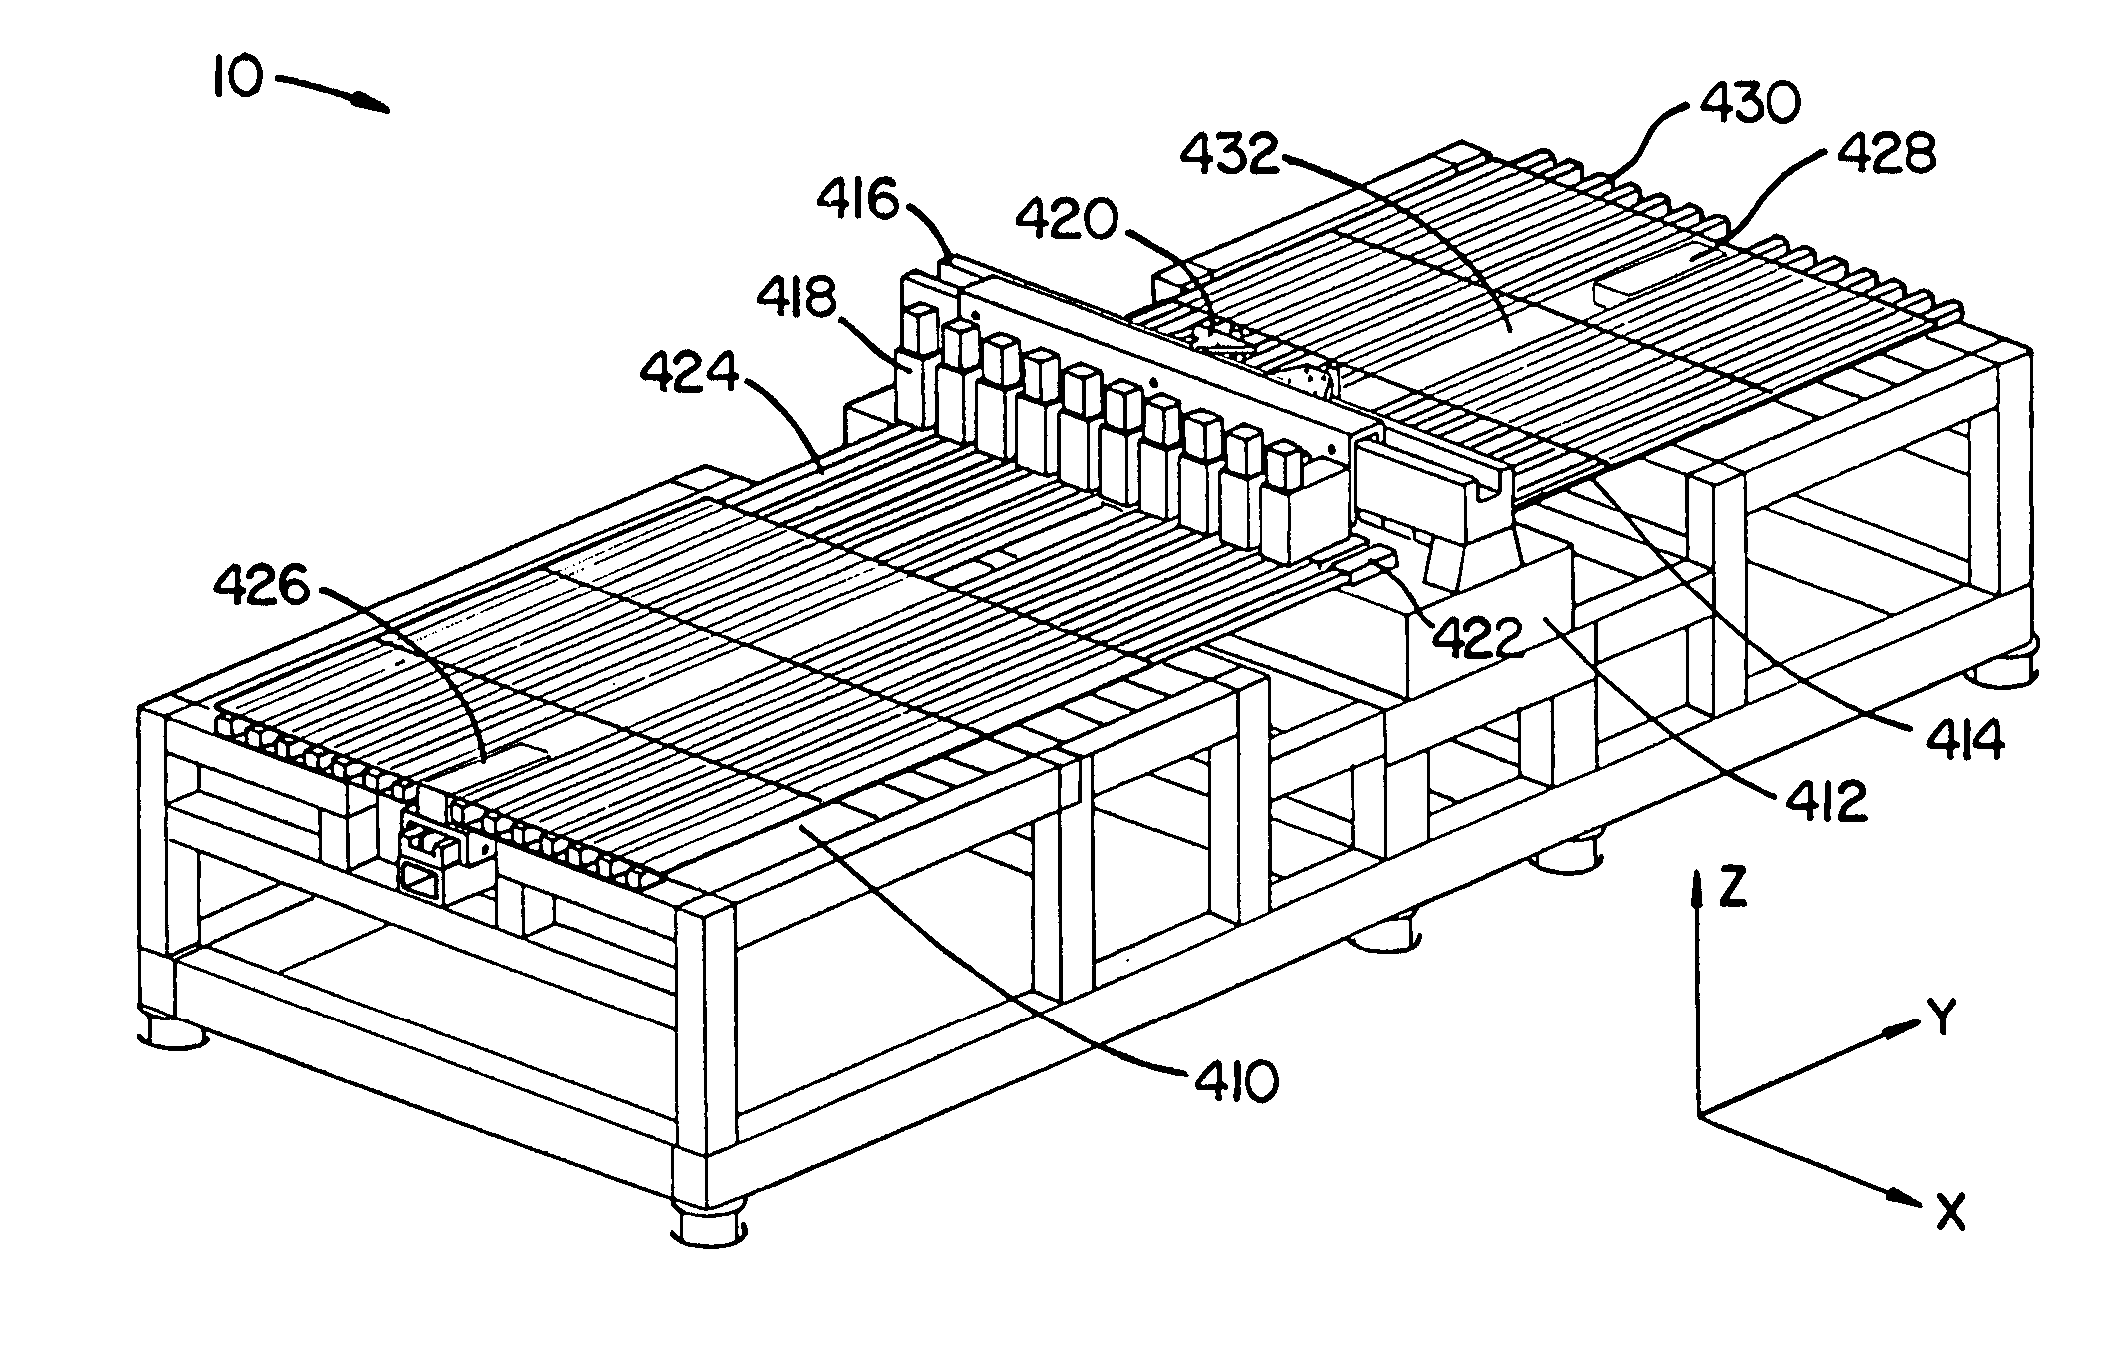 High precision gas bearing split-axis stage for transport and constraint of large flat flexible media during processing